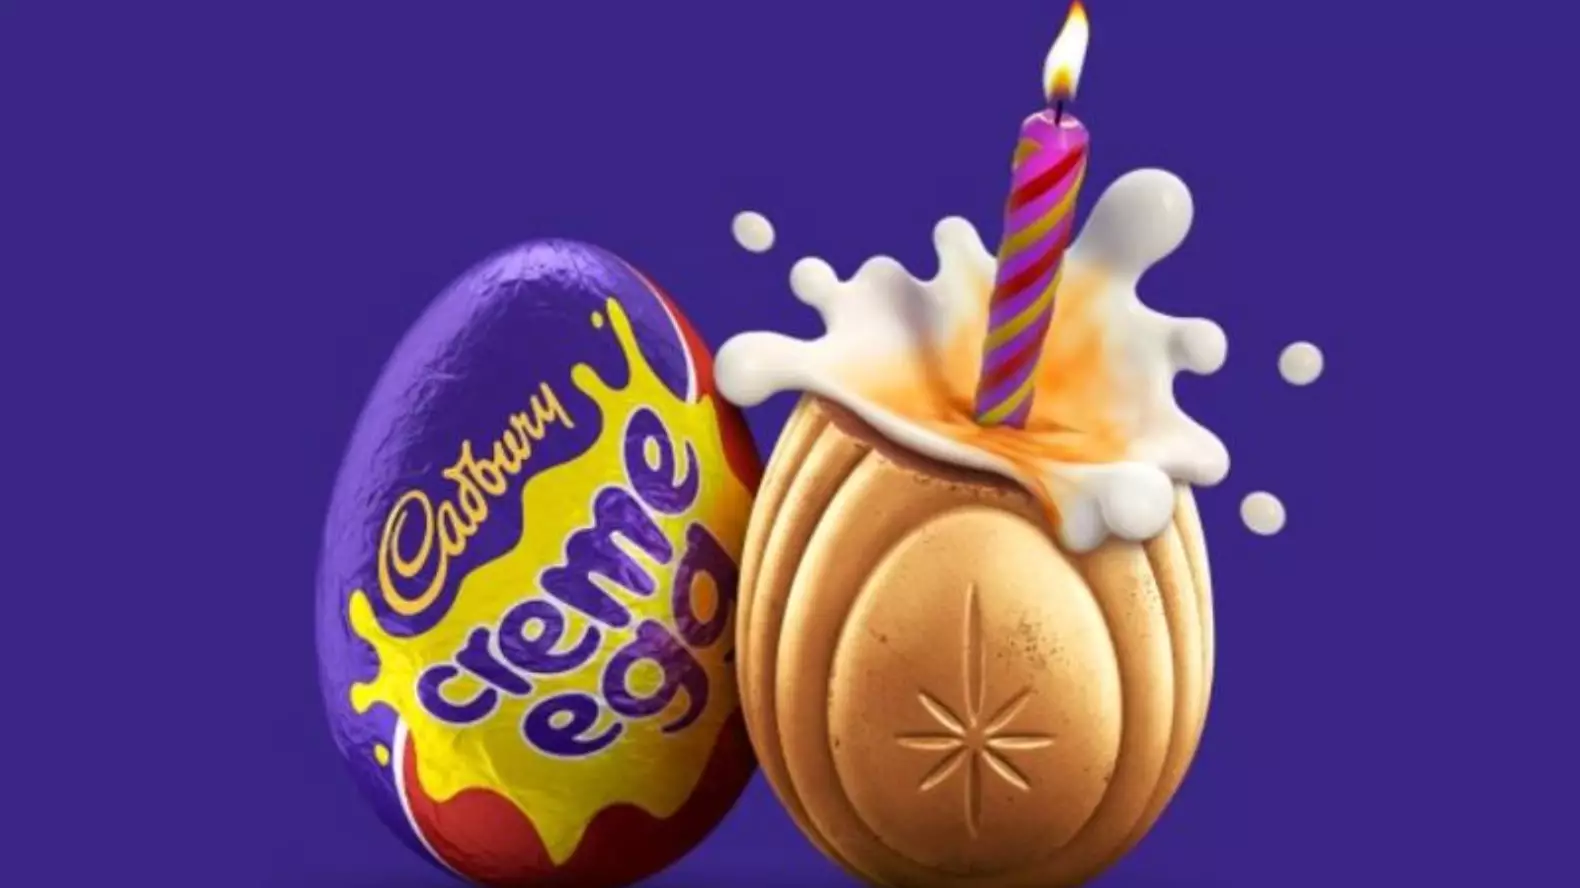 Cadbury Has Hidden 200 Gold Creme Eggs And Customers Could Win £5,000 If They Find One